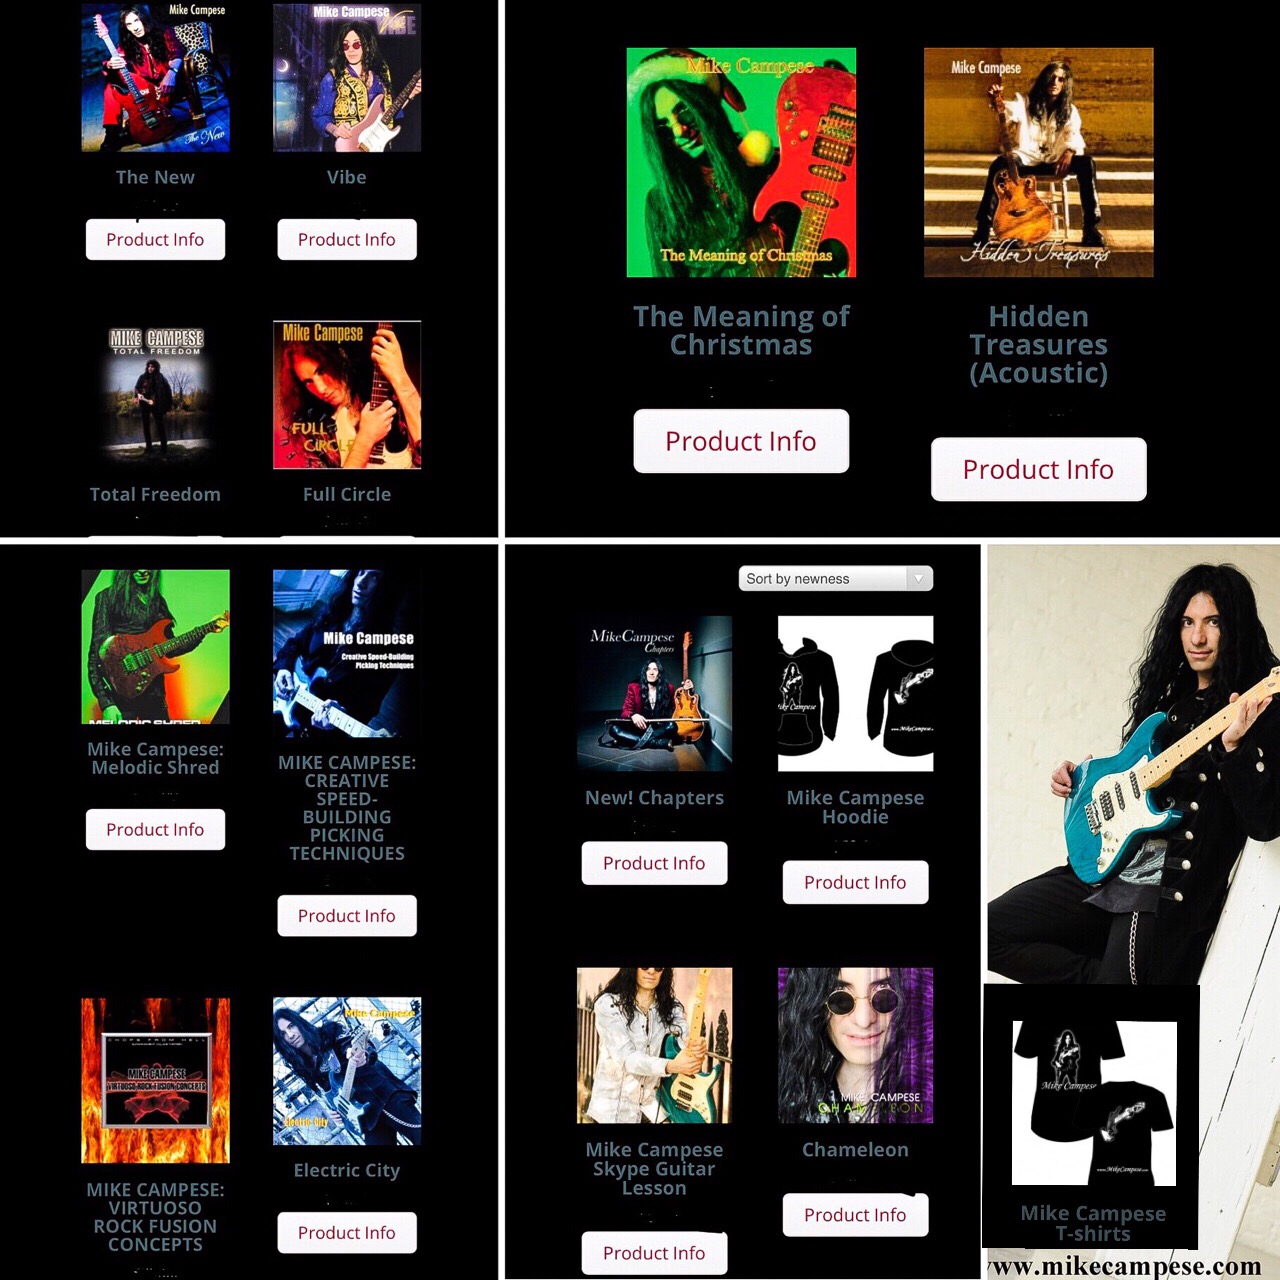 Mike Campese Merch Flyer.